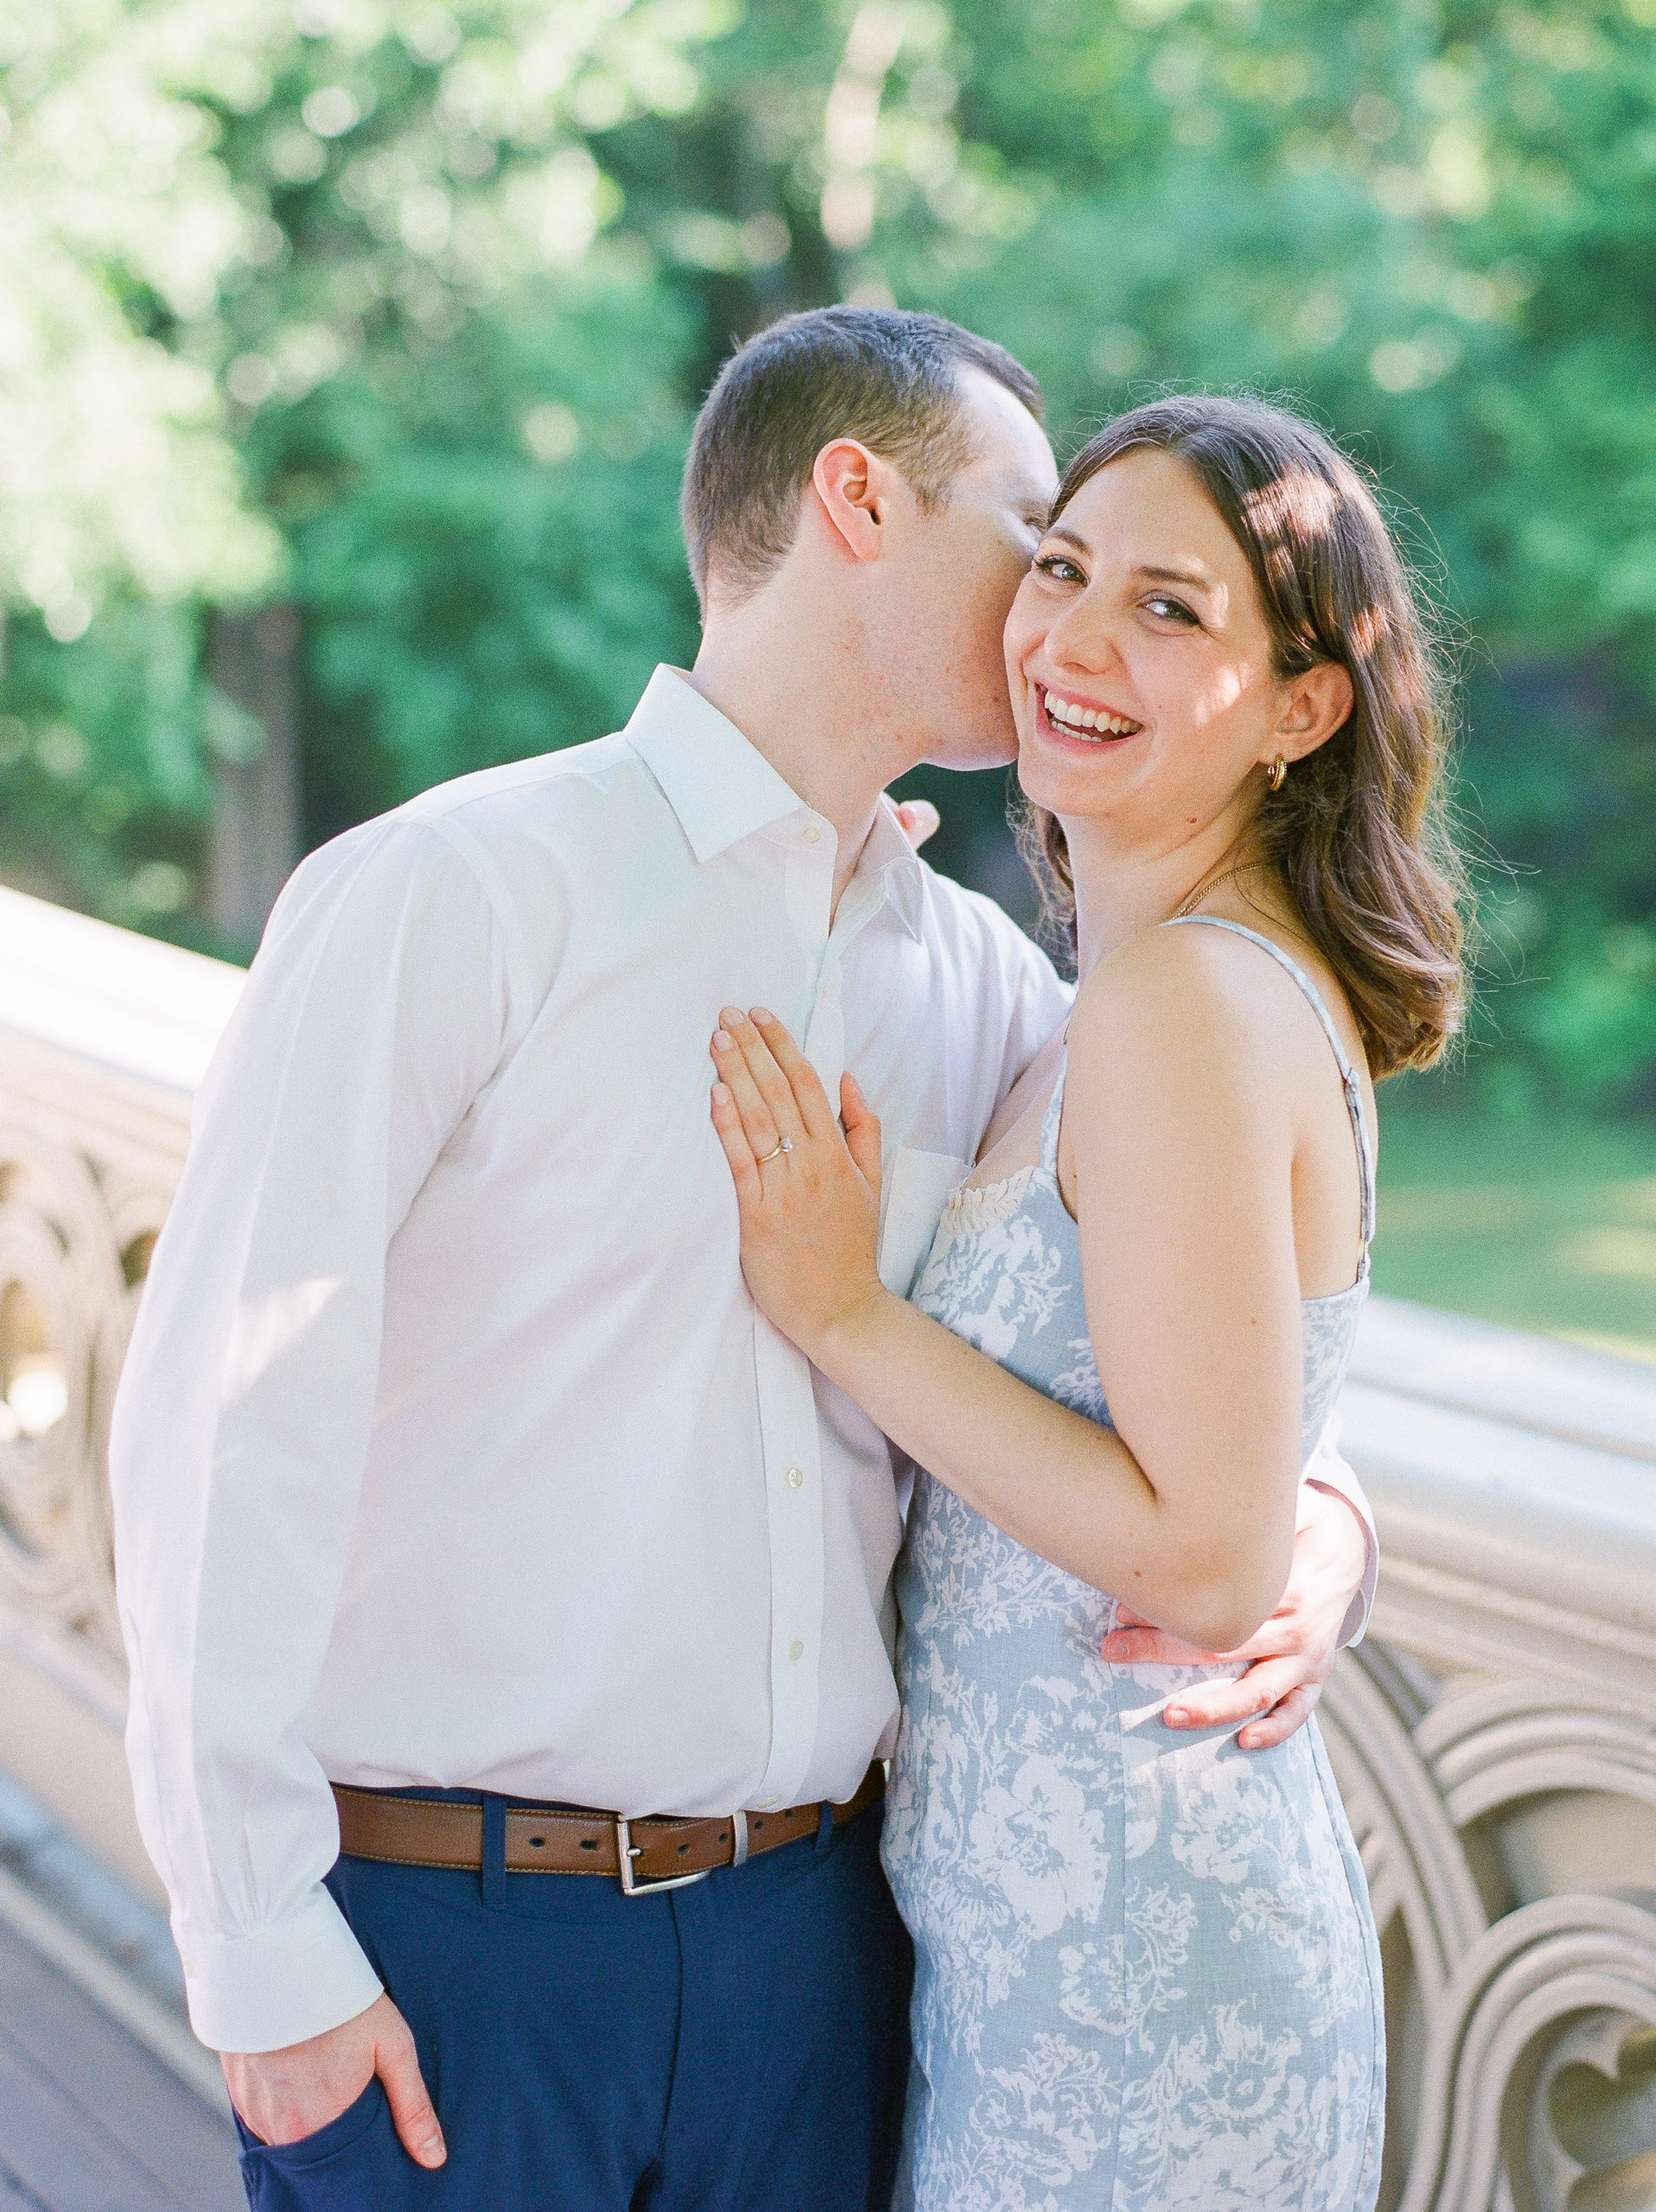 Couple embrace, smile, and whisper on bridge in the park for Central Park Engagement Photos